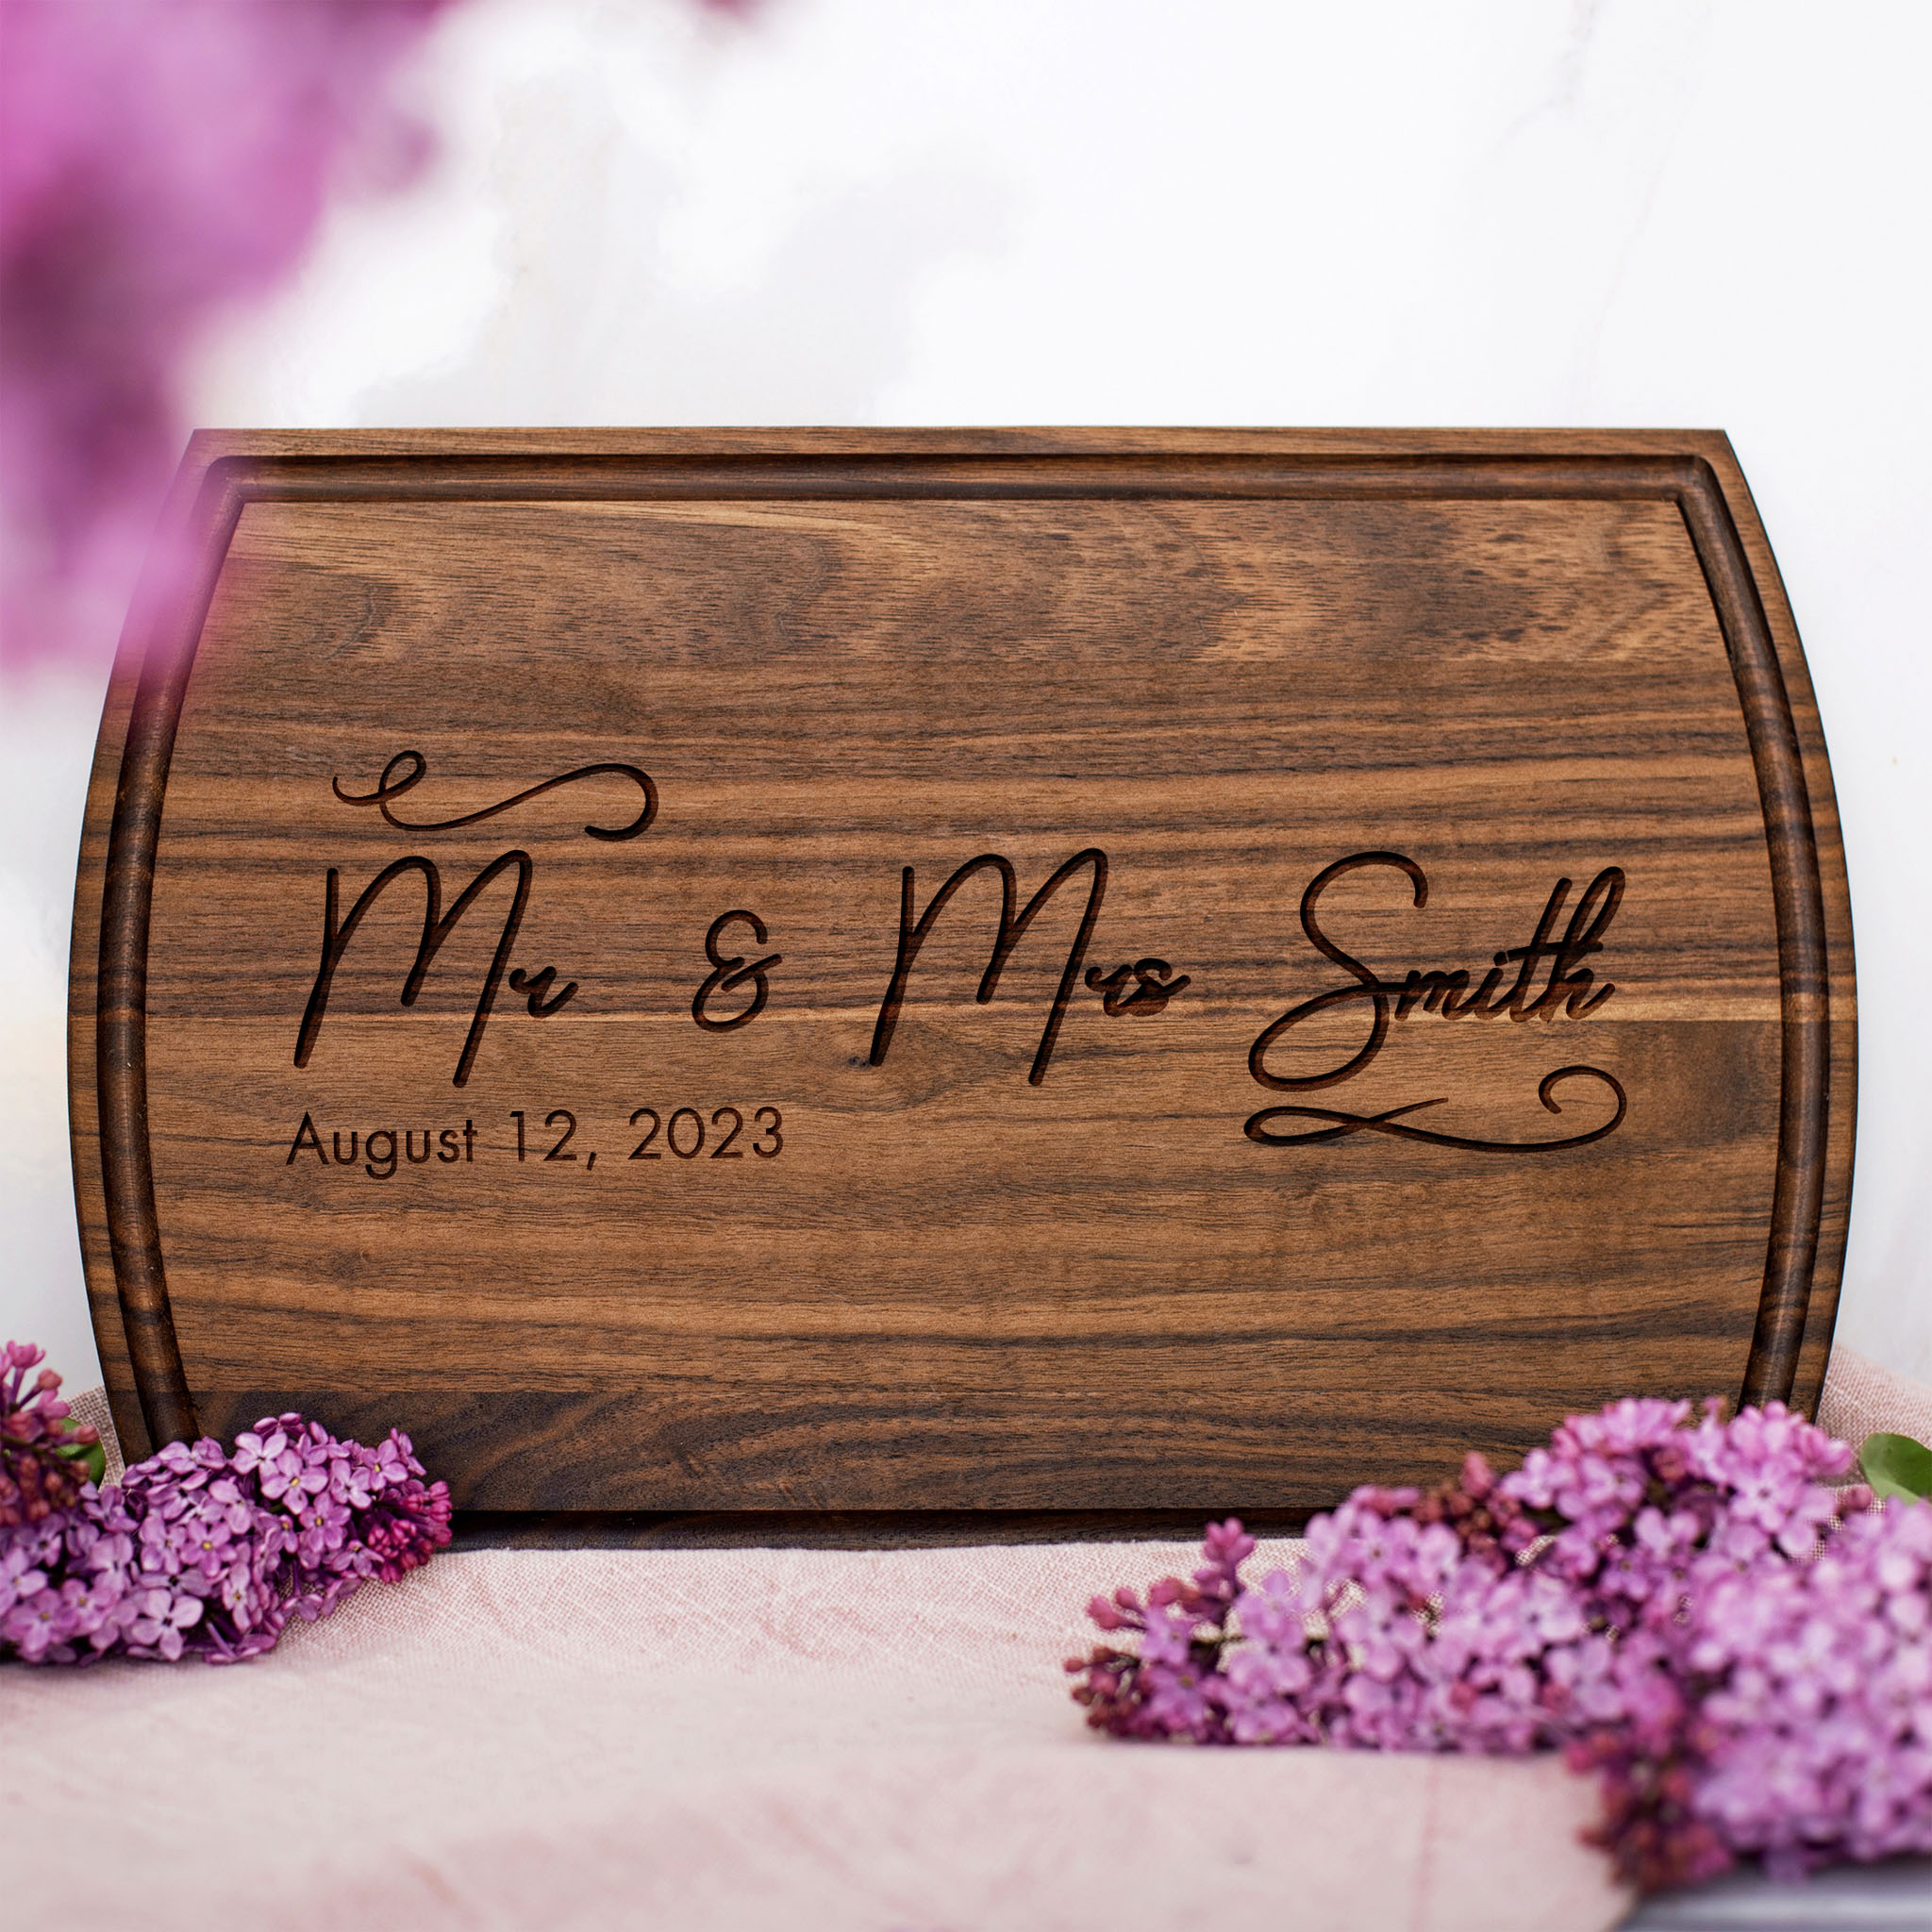 20 incredible personalized wedding gifts for the couple - Reviewed